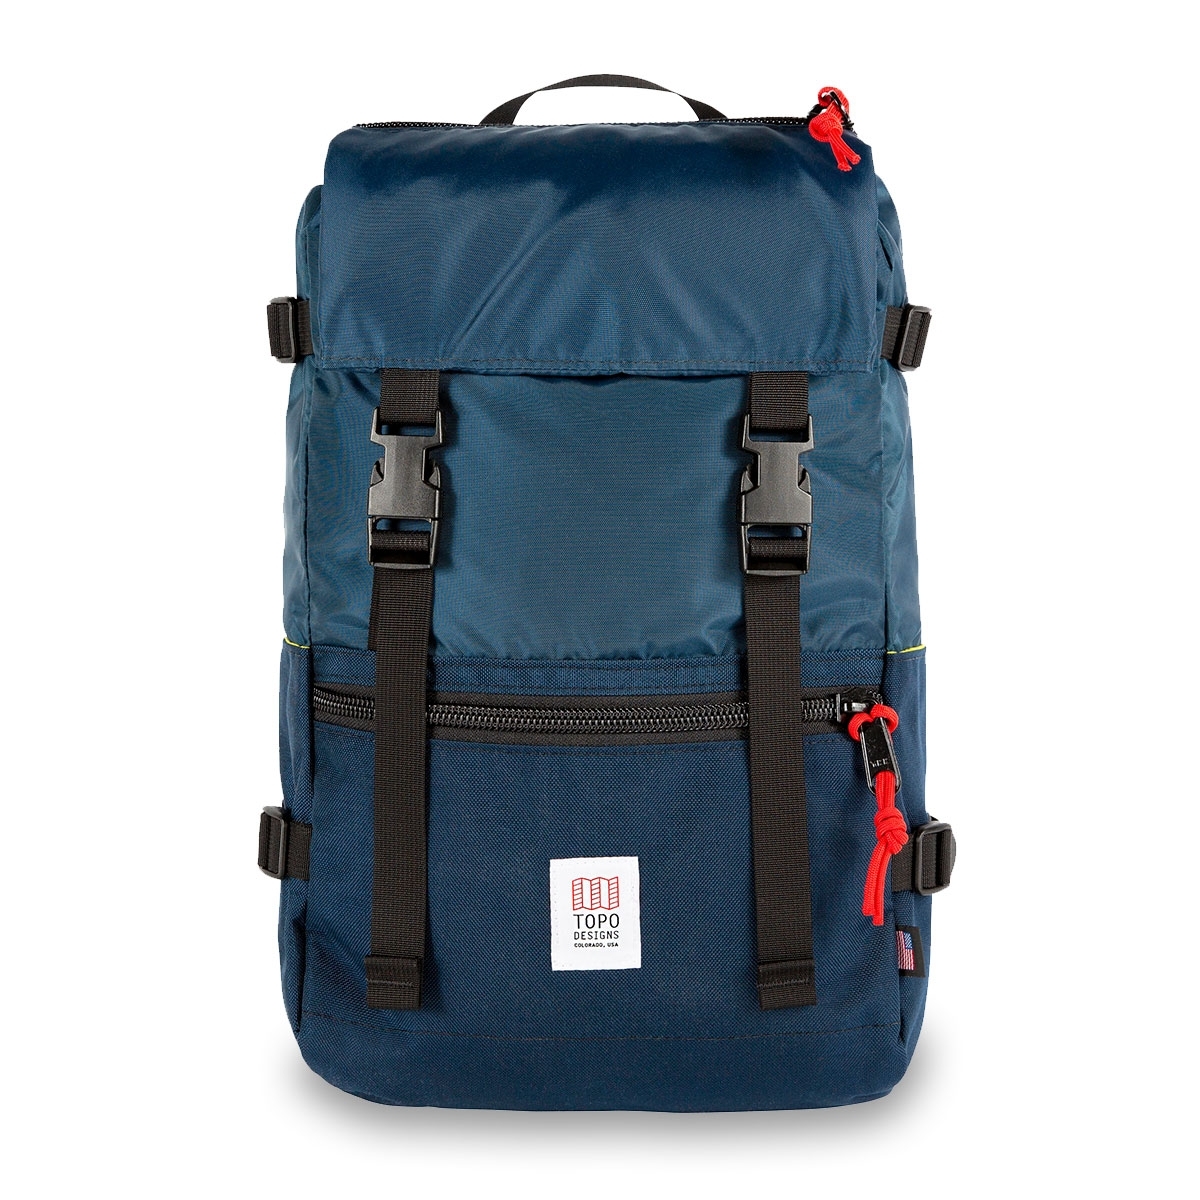 Topo Designs Rover Pack Navy, timeless pack with great functionality